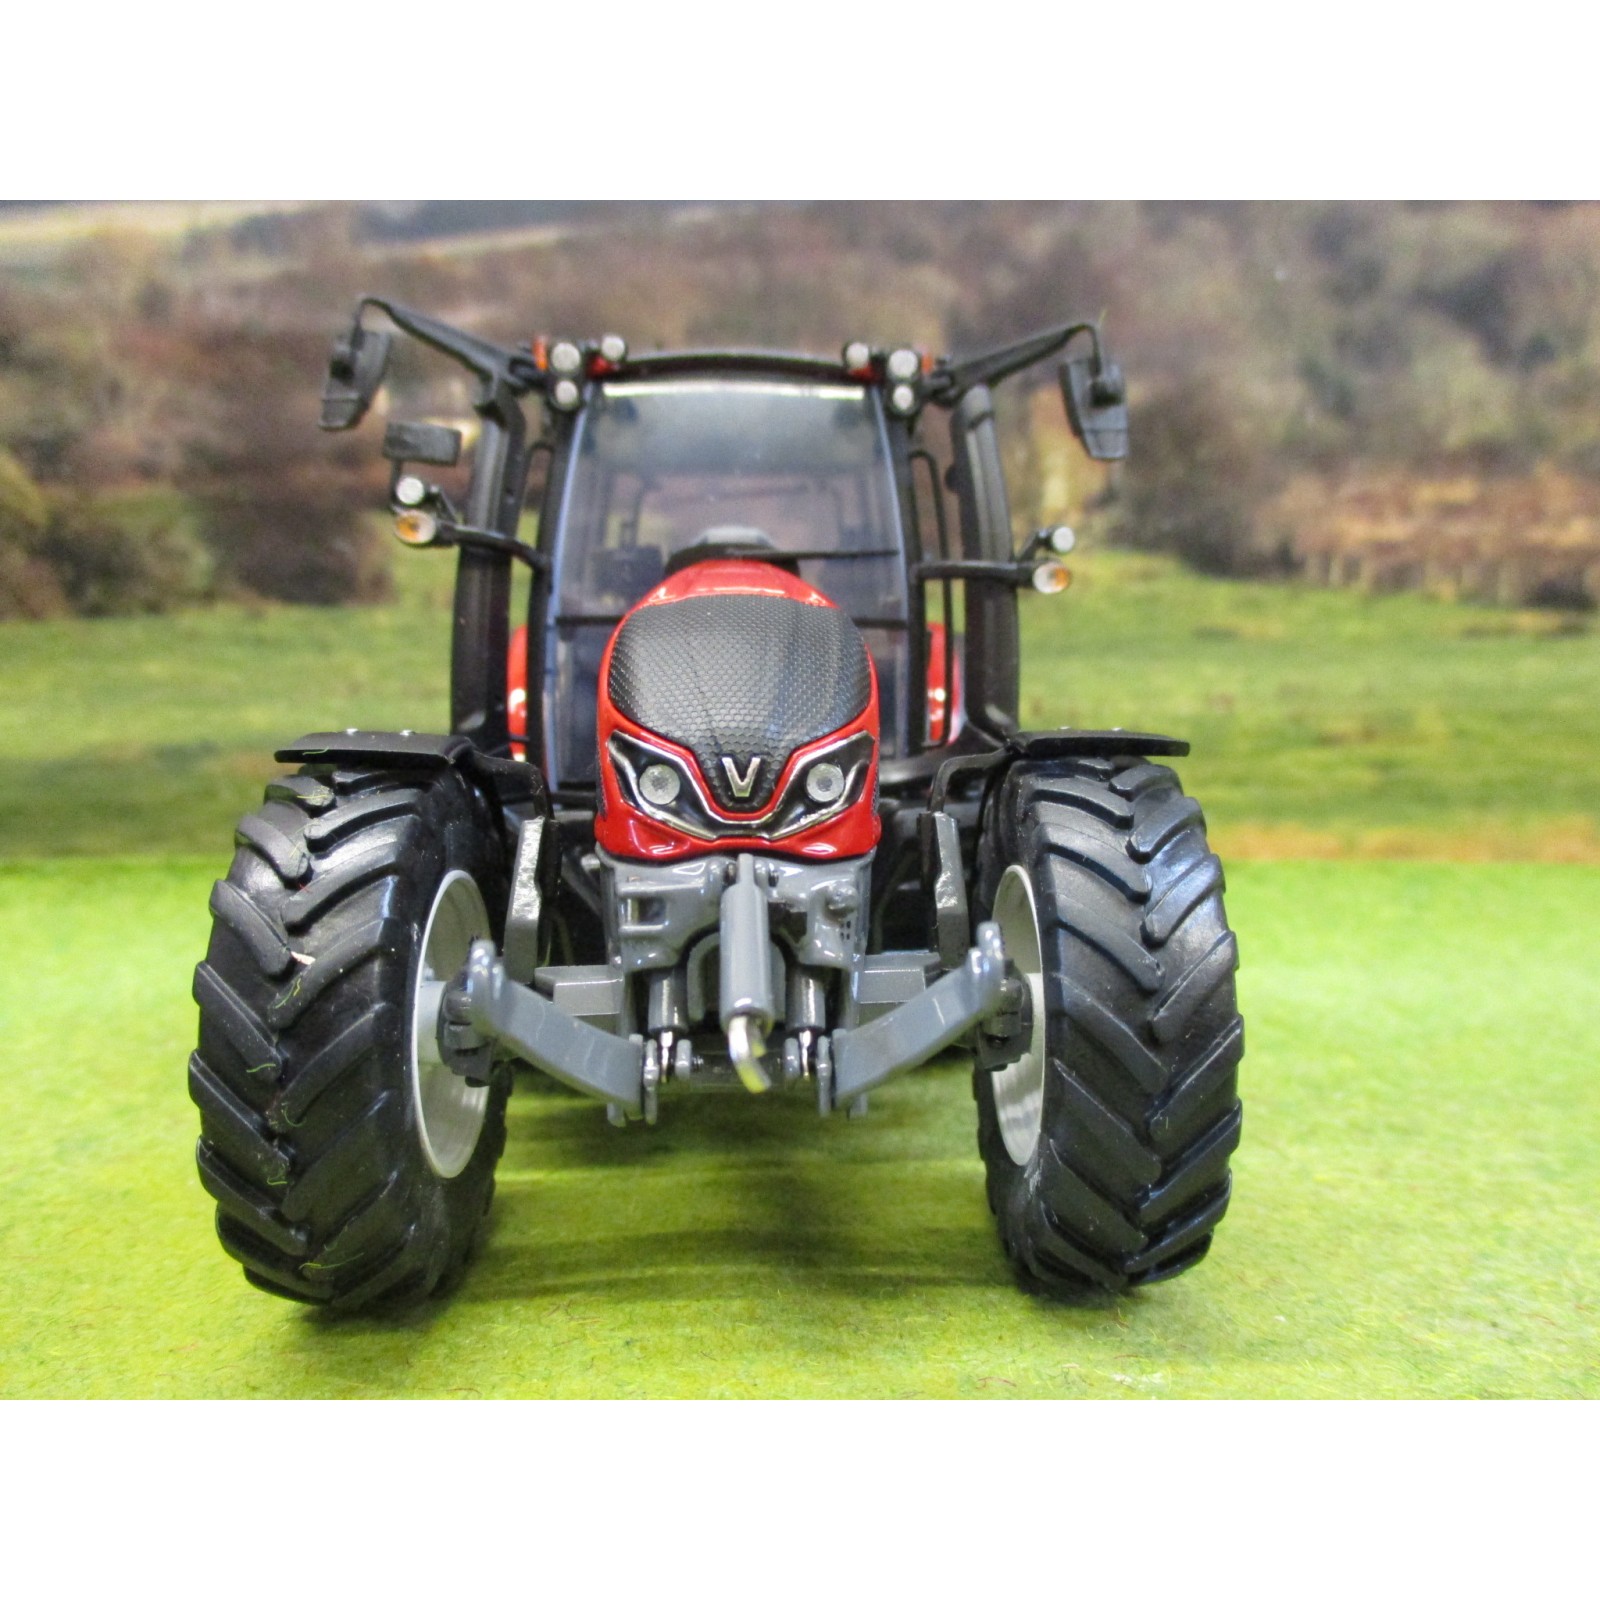 UH - Valtra G135 - Rouge - Edition Limitee 750# - 1 32